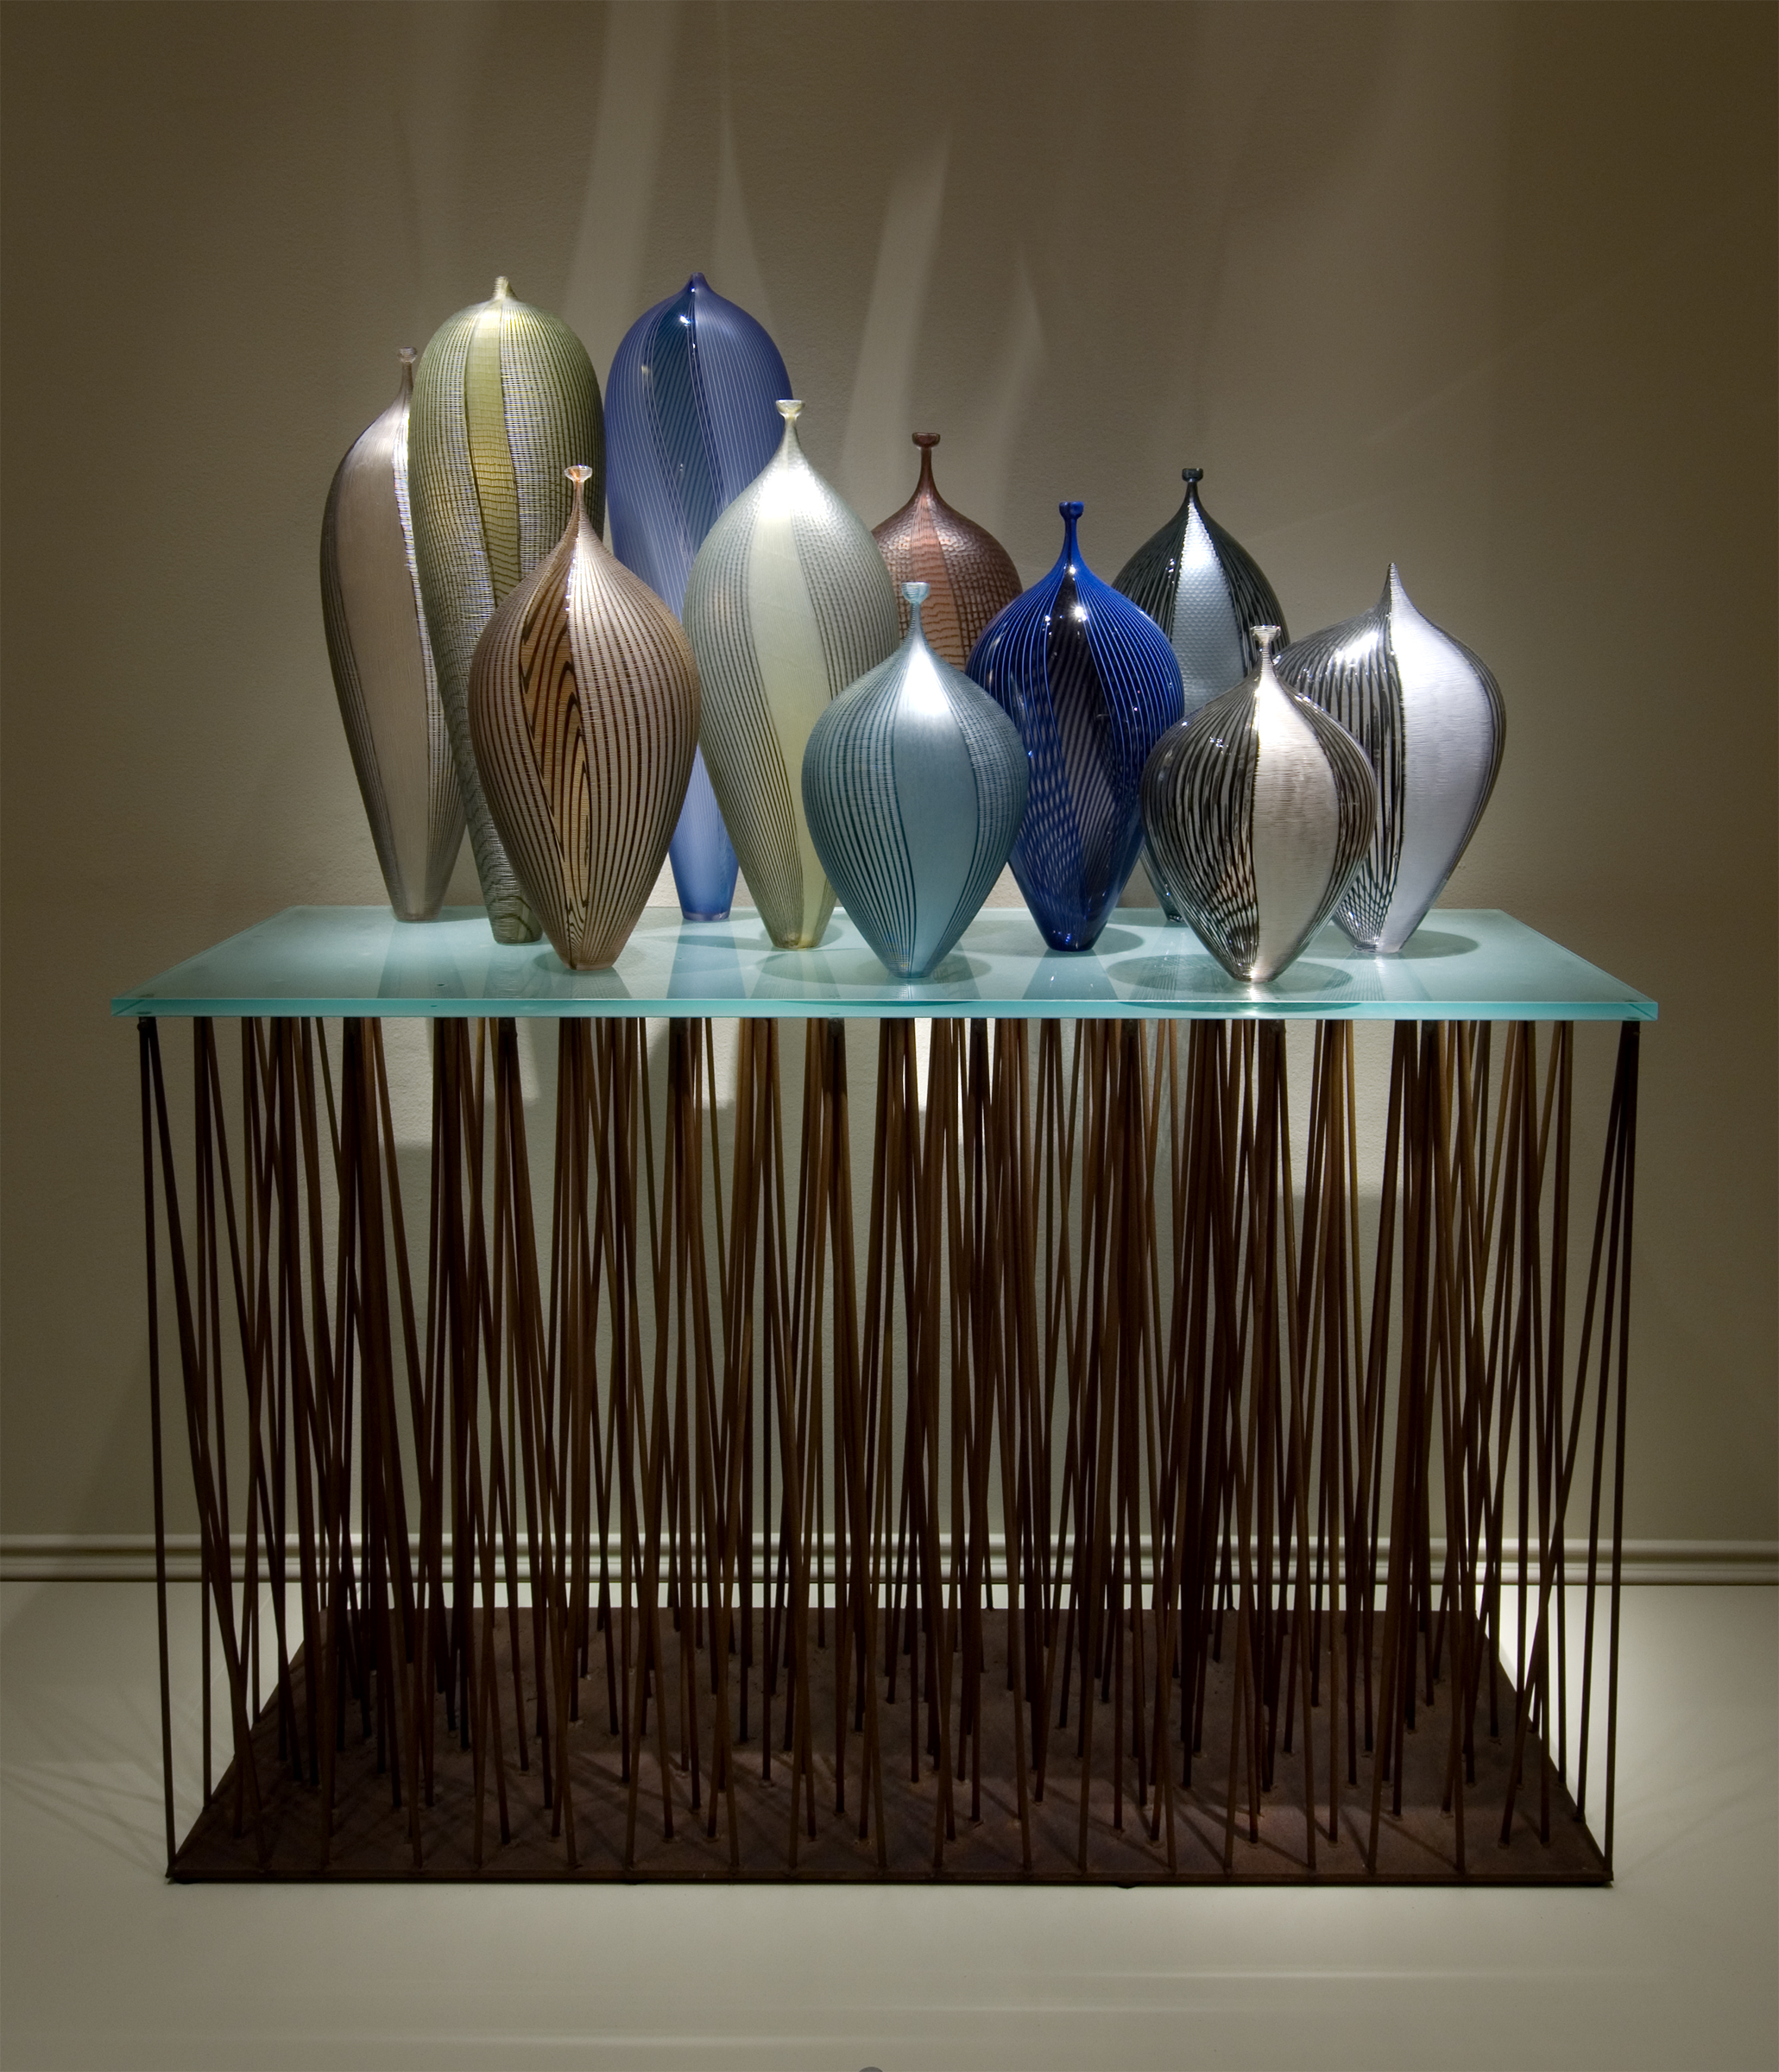  Lino Tagliapietra (Italian, born 1934).&nbsp; Manhattan Sunset,  1997.&nbsp;Blown glass with canepick-ups,  battuto  and  inciso  cut; steel and glass base;&nbsp;67 x 60 x 20 in.&nbsp;Collection of Museum of Glass, Tacoma, Washington.&nbsp;Photo cou